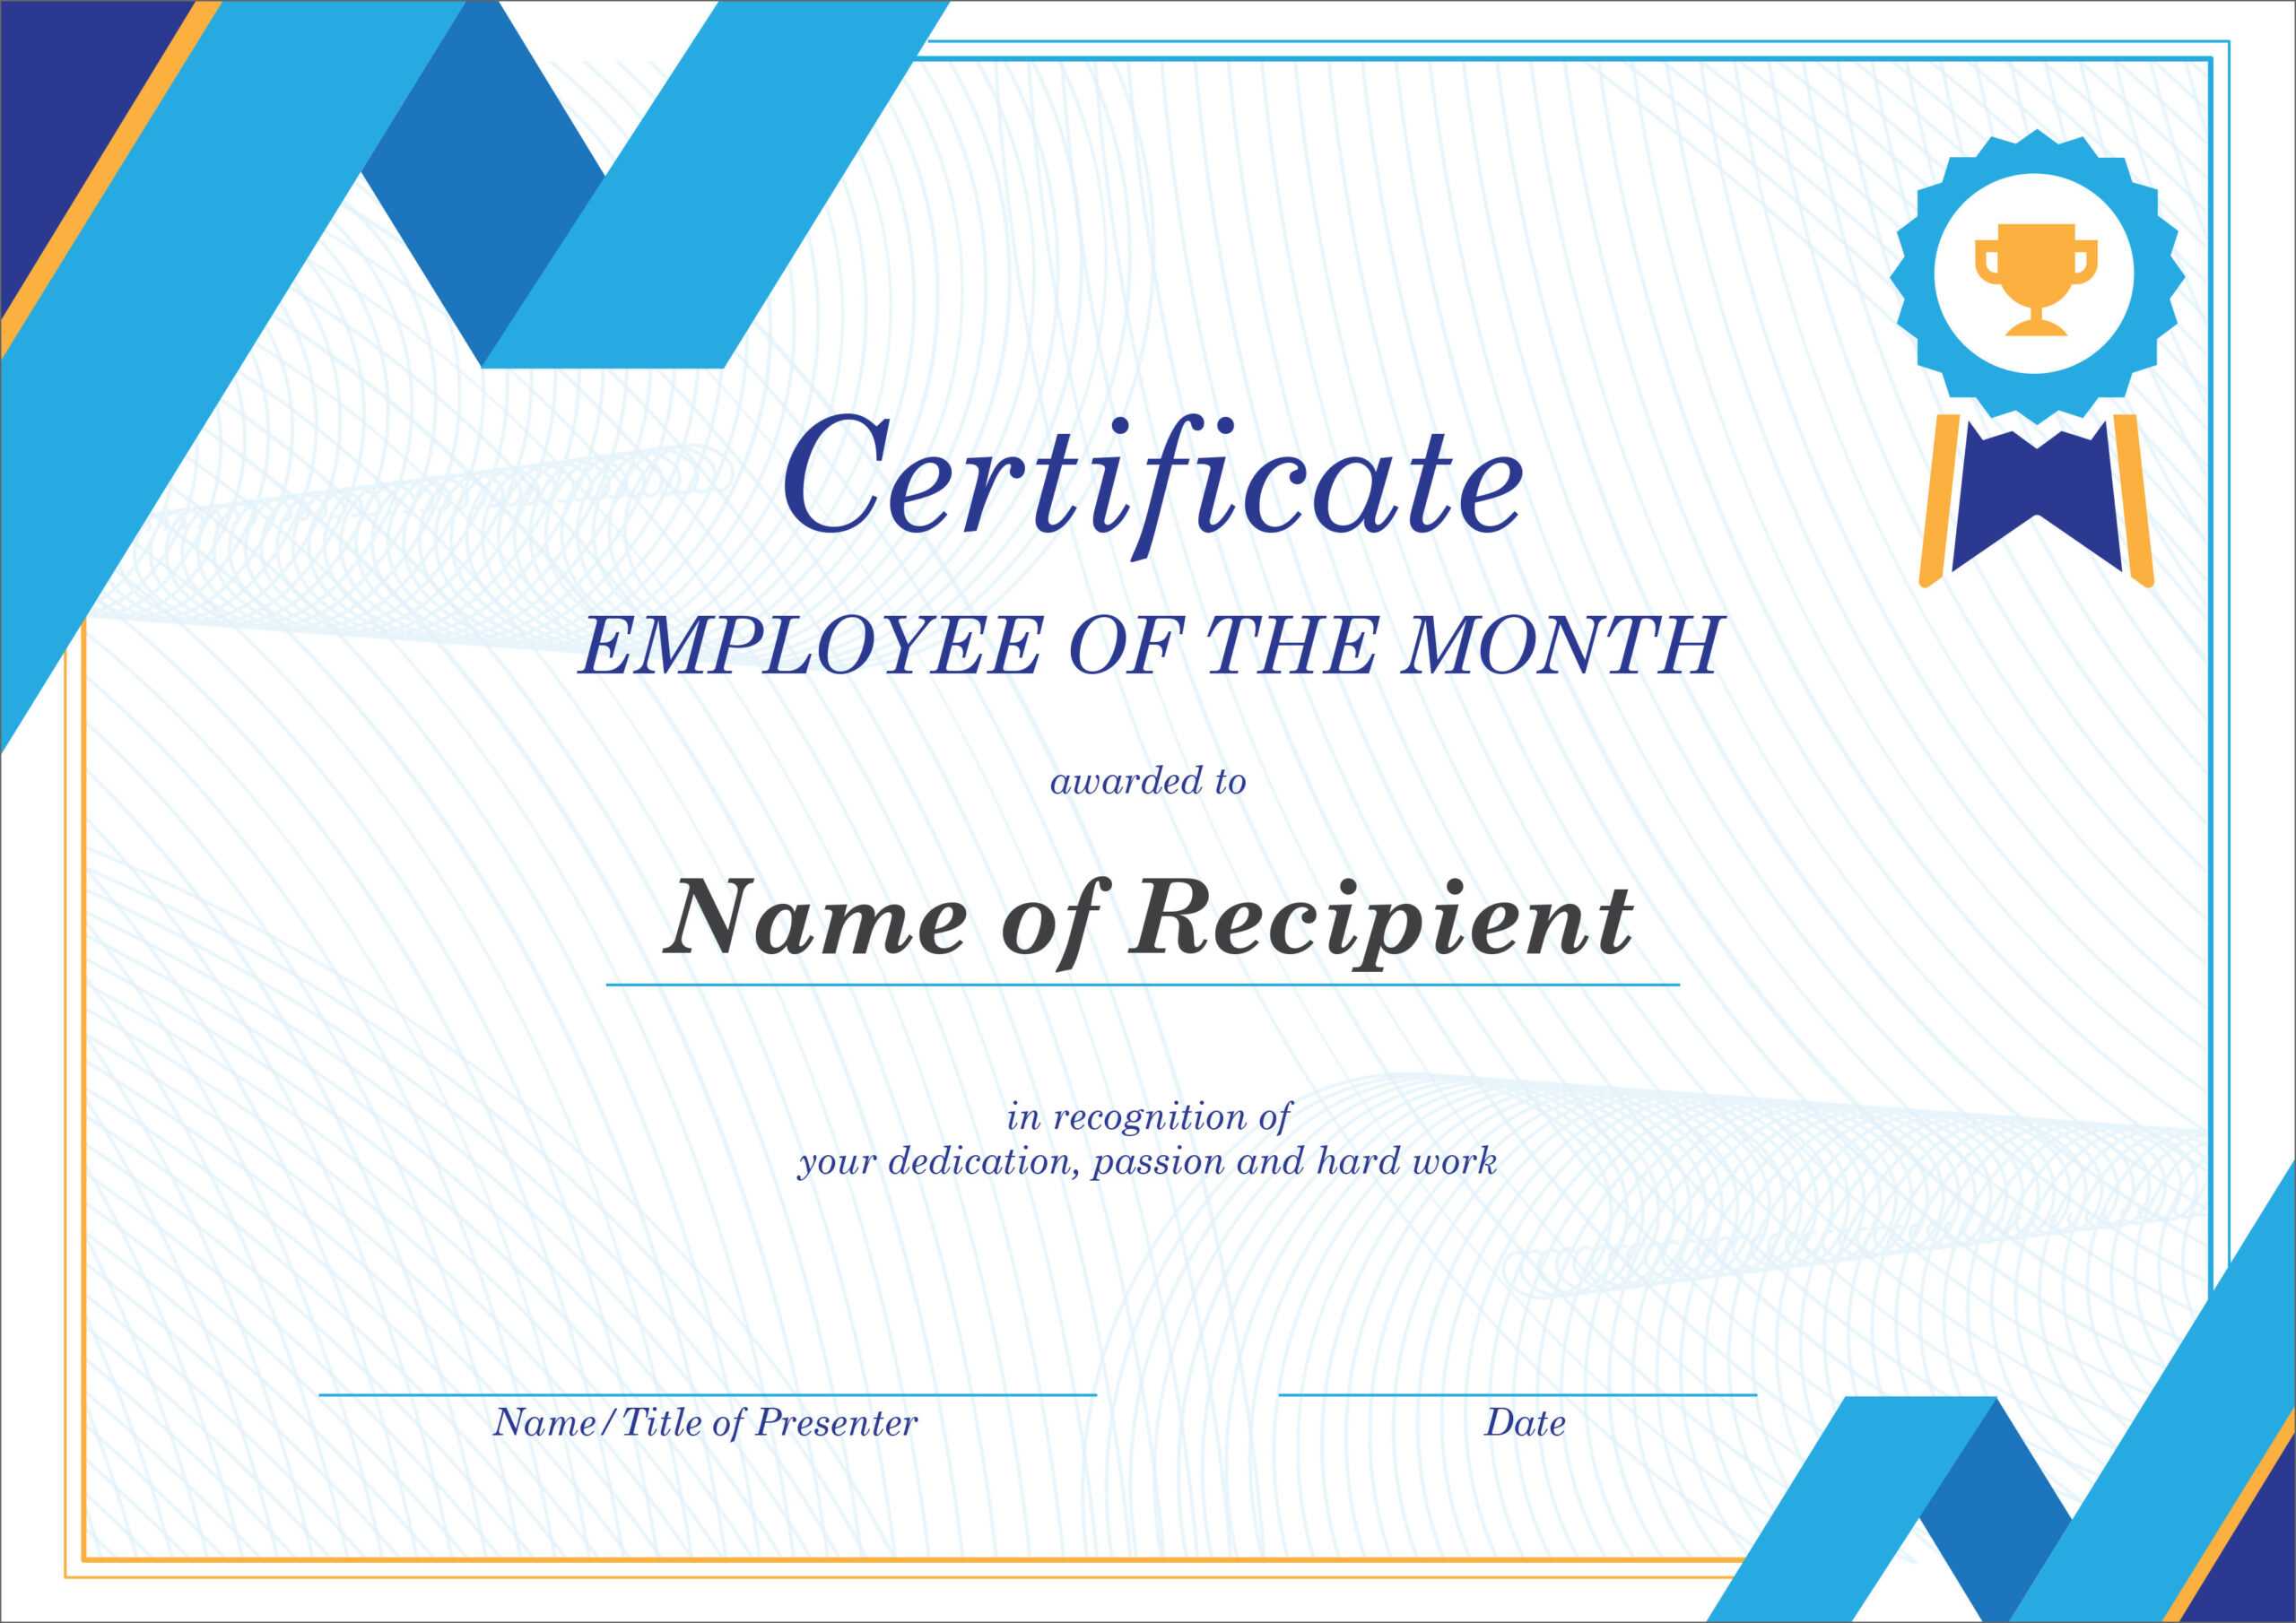 50 Free Creative Blank Certificate Templates In Psd Throughout Employee Of The Month Certificate Templates